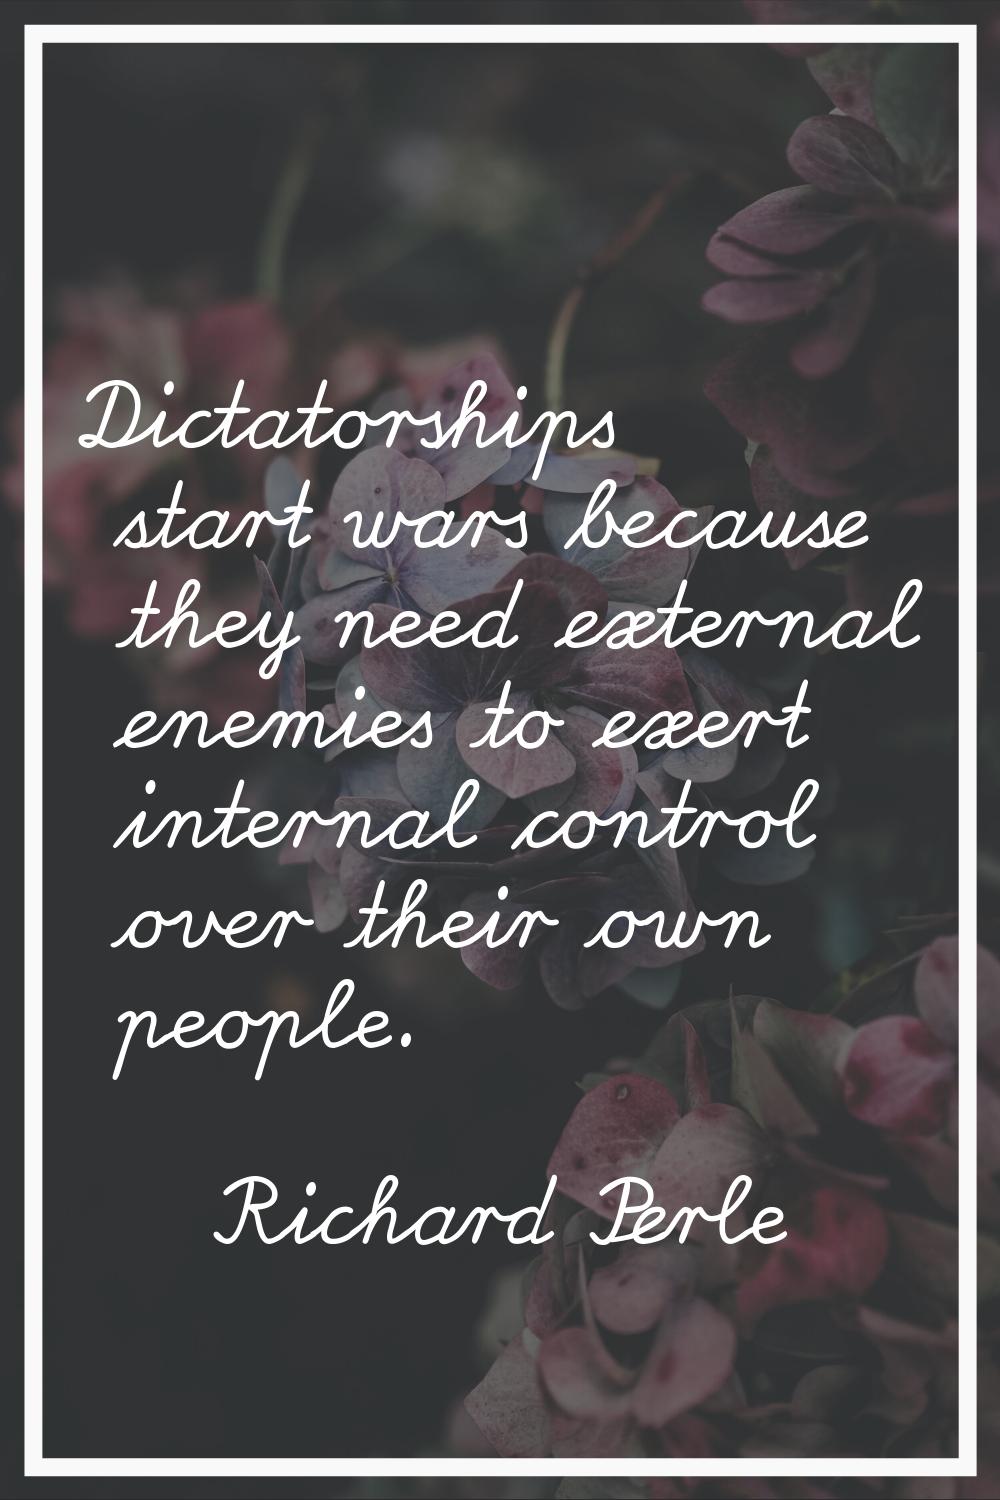 Dictatorships start wars because they need external enemies to exert internal control over their ow